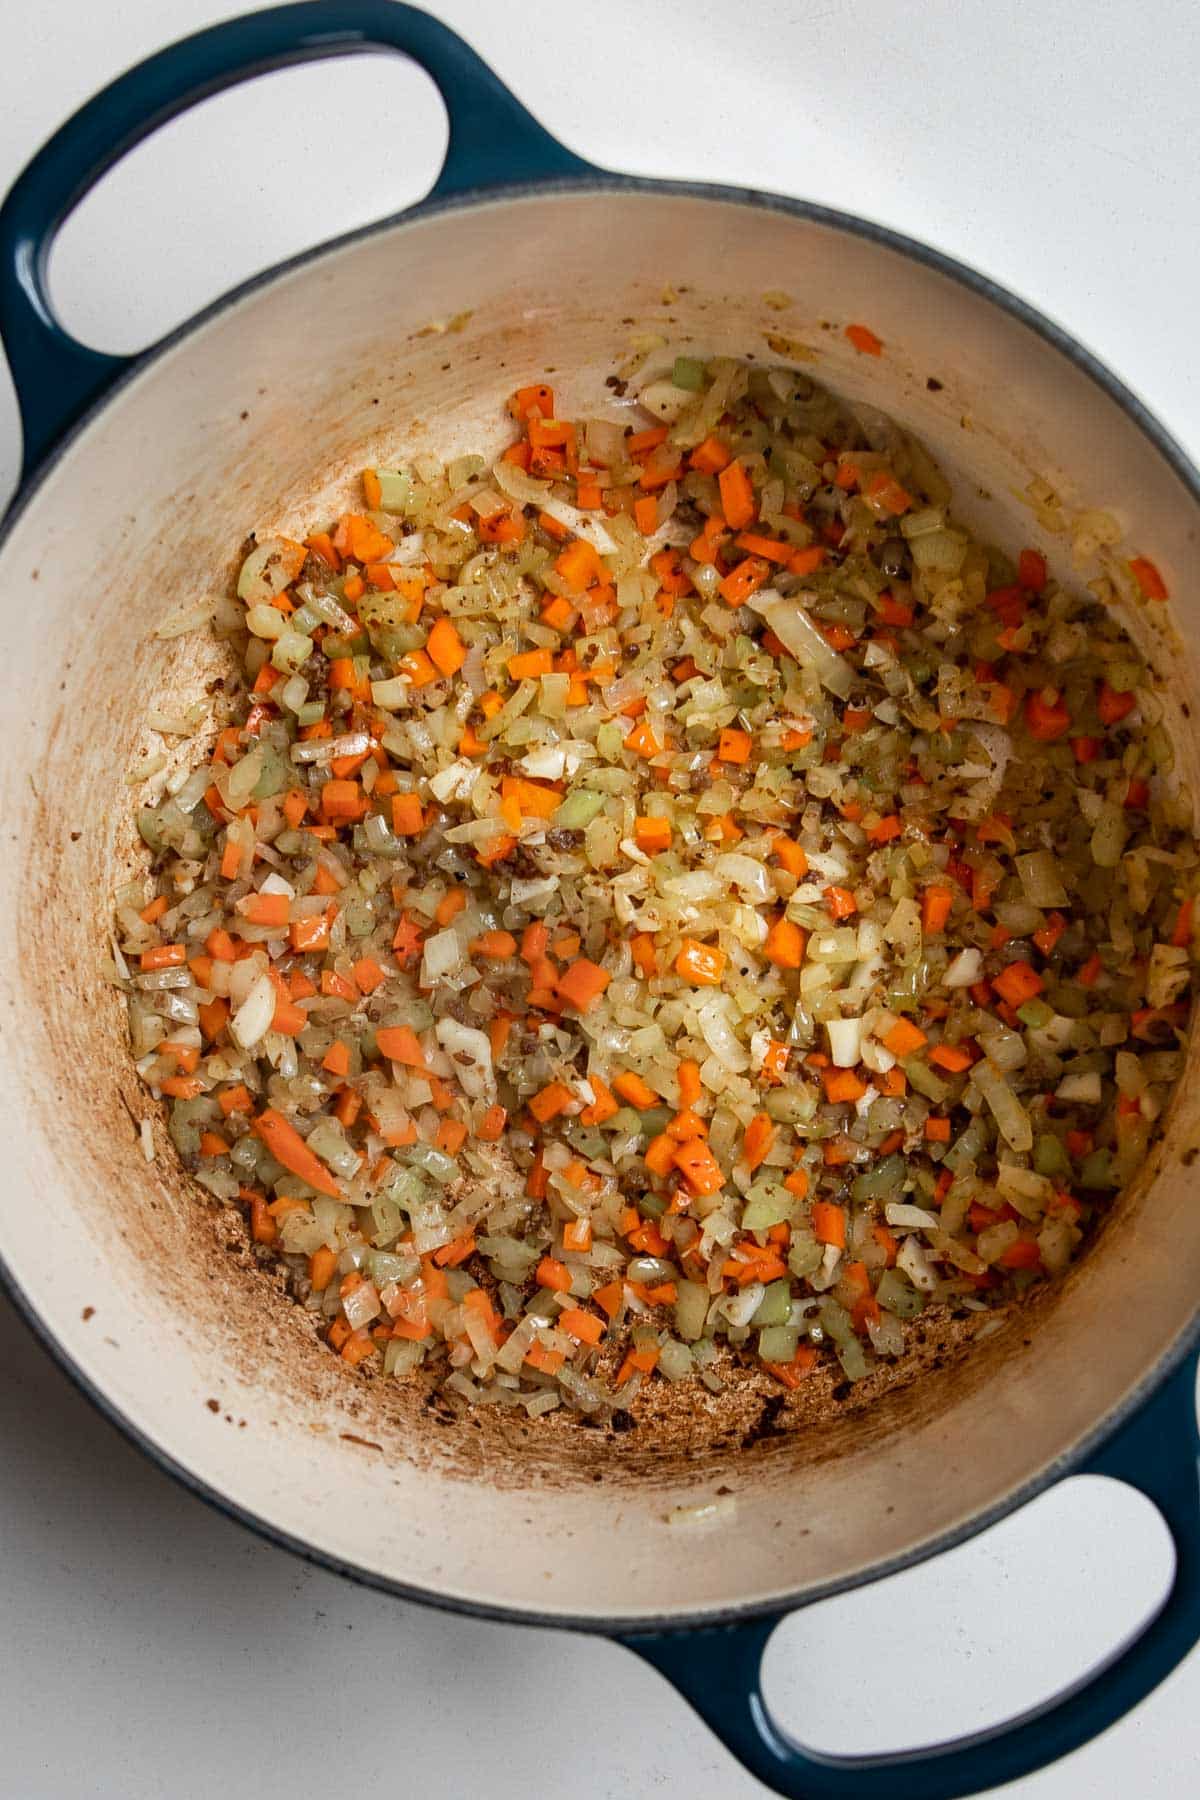 cooked mirepoix of carrot, onion and celery in a pot.